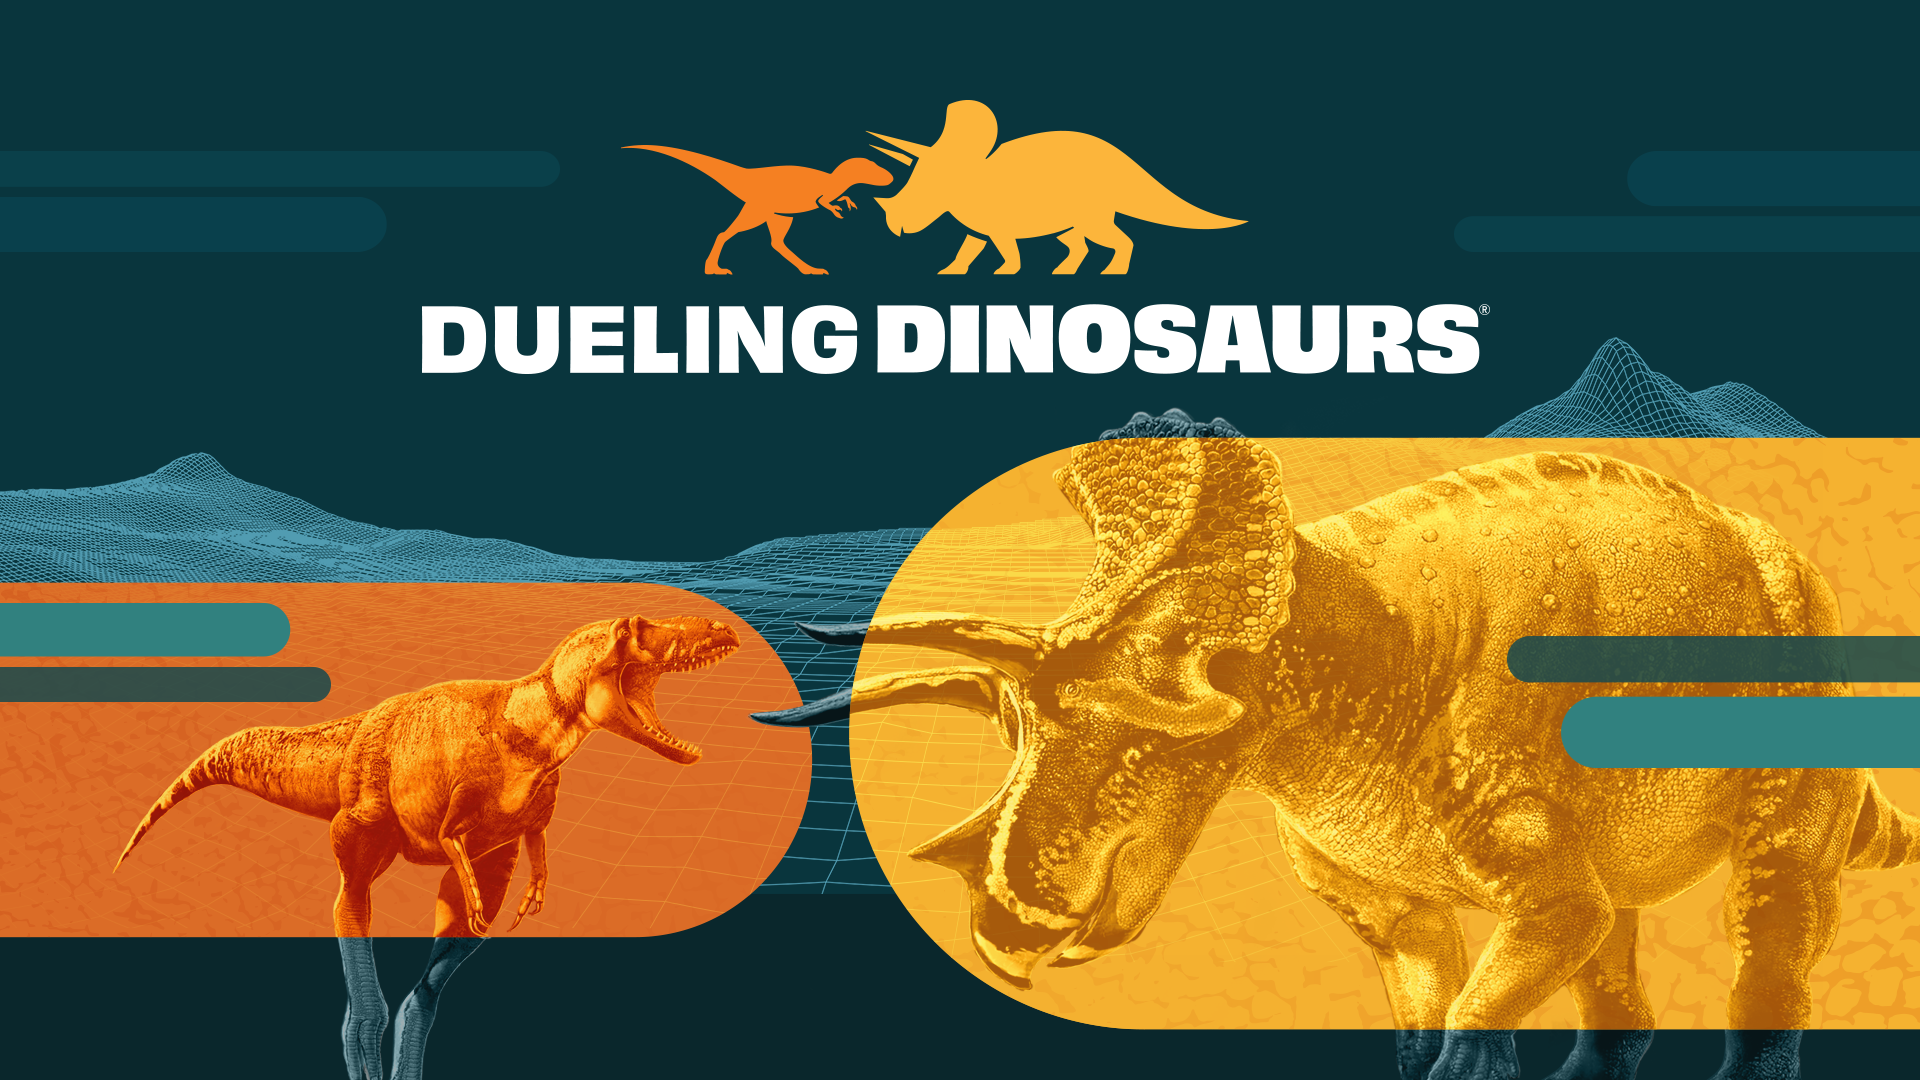 Dueling Dinosaurs: a tyrannosaur faces off against a Triceratops.